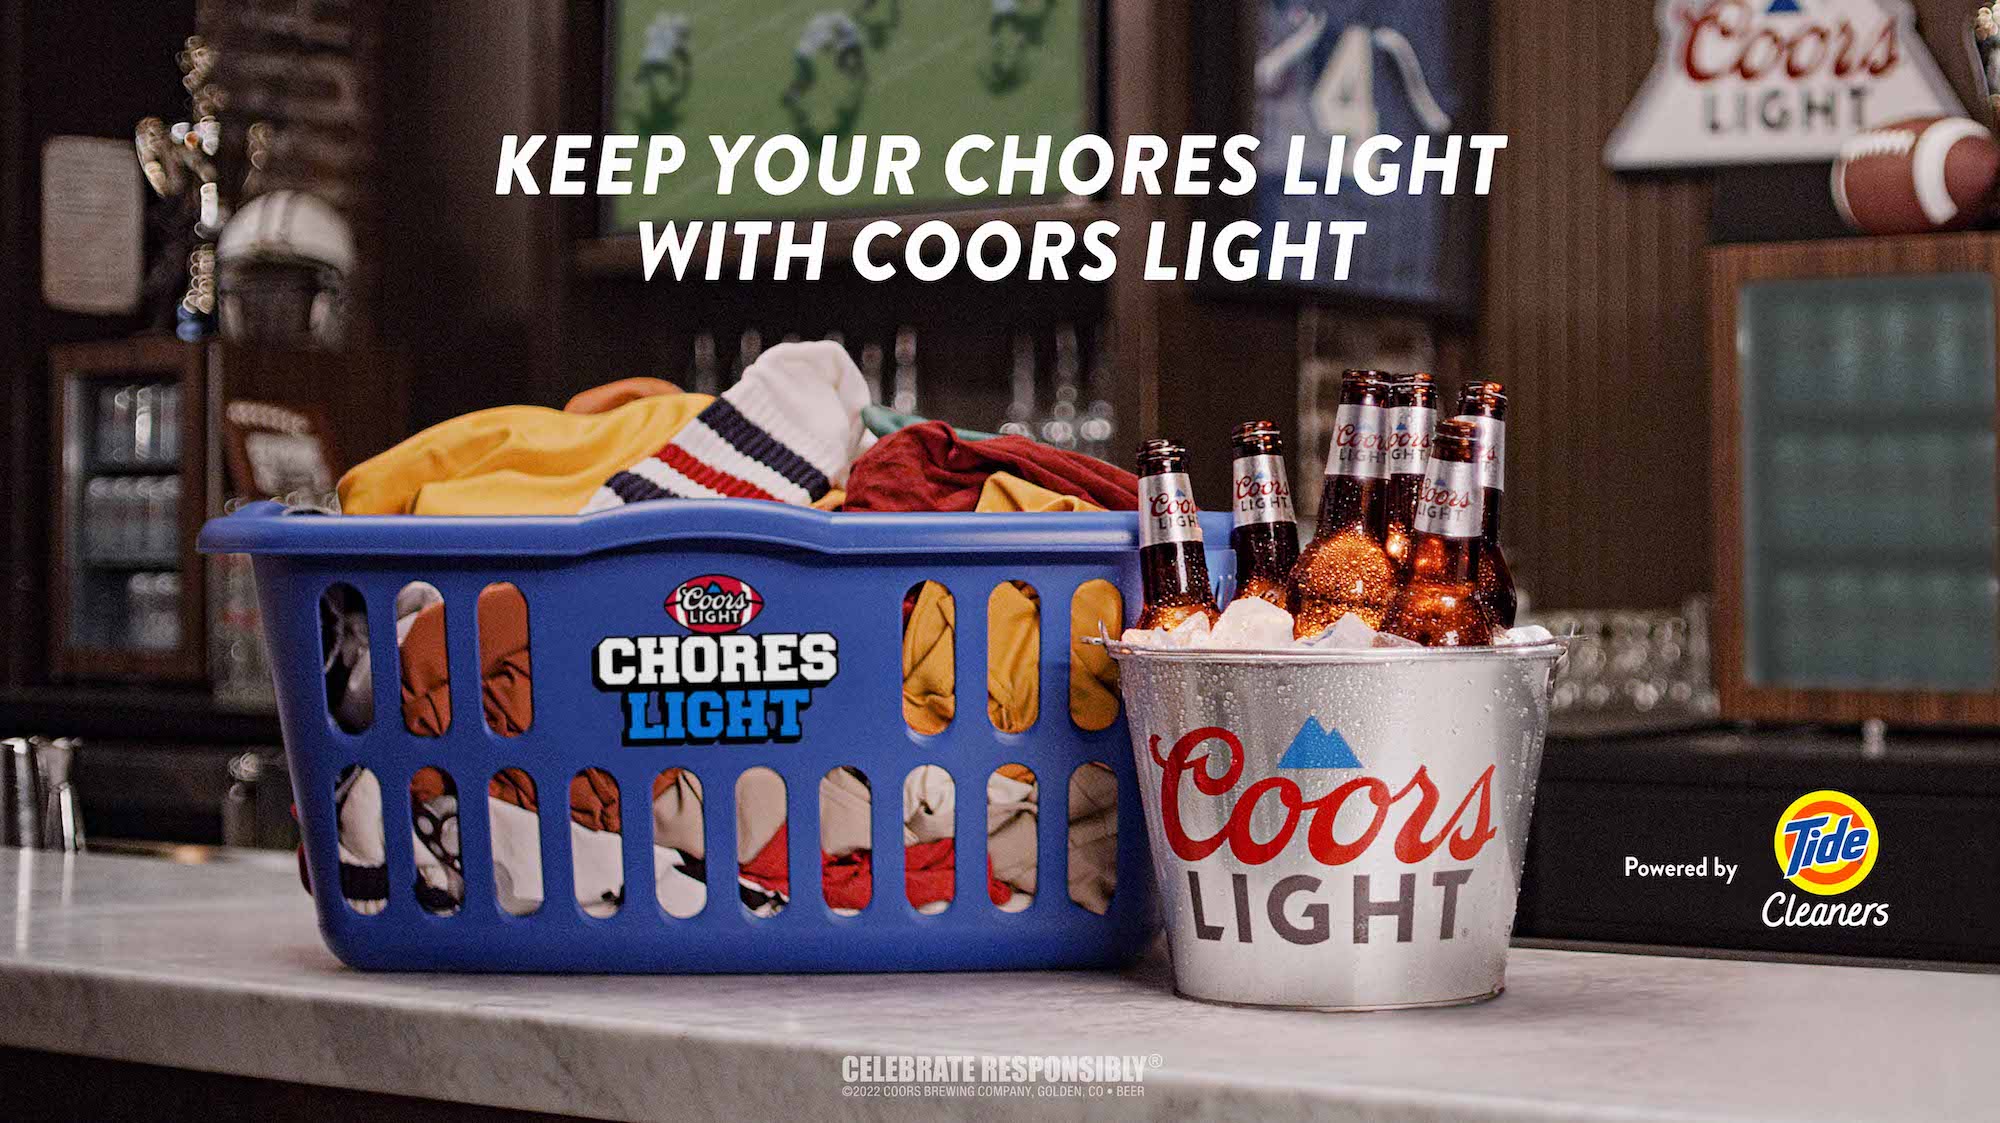 https://www.usmagazine.com/wp-content/uploads/2022/10/Coors-Light-Tide-Cleaners.jpg?quality=74&strip=all